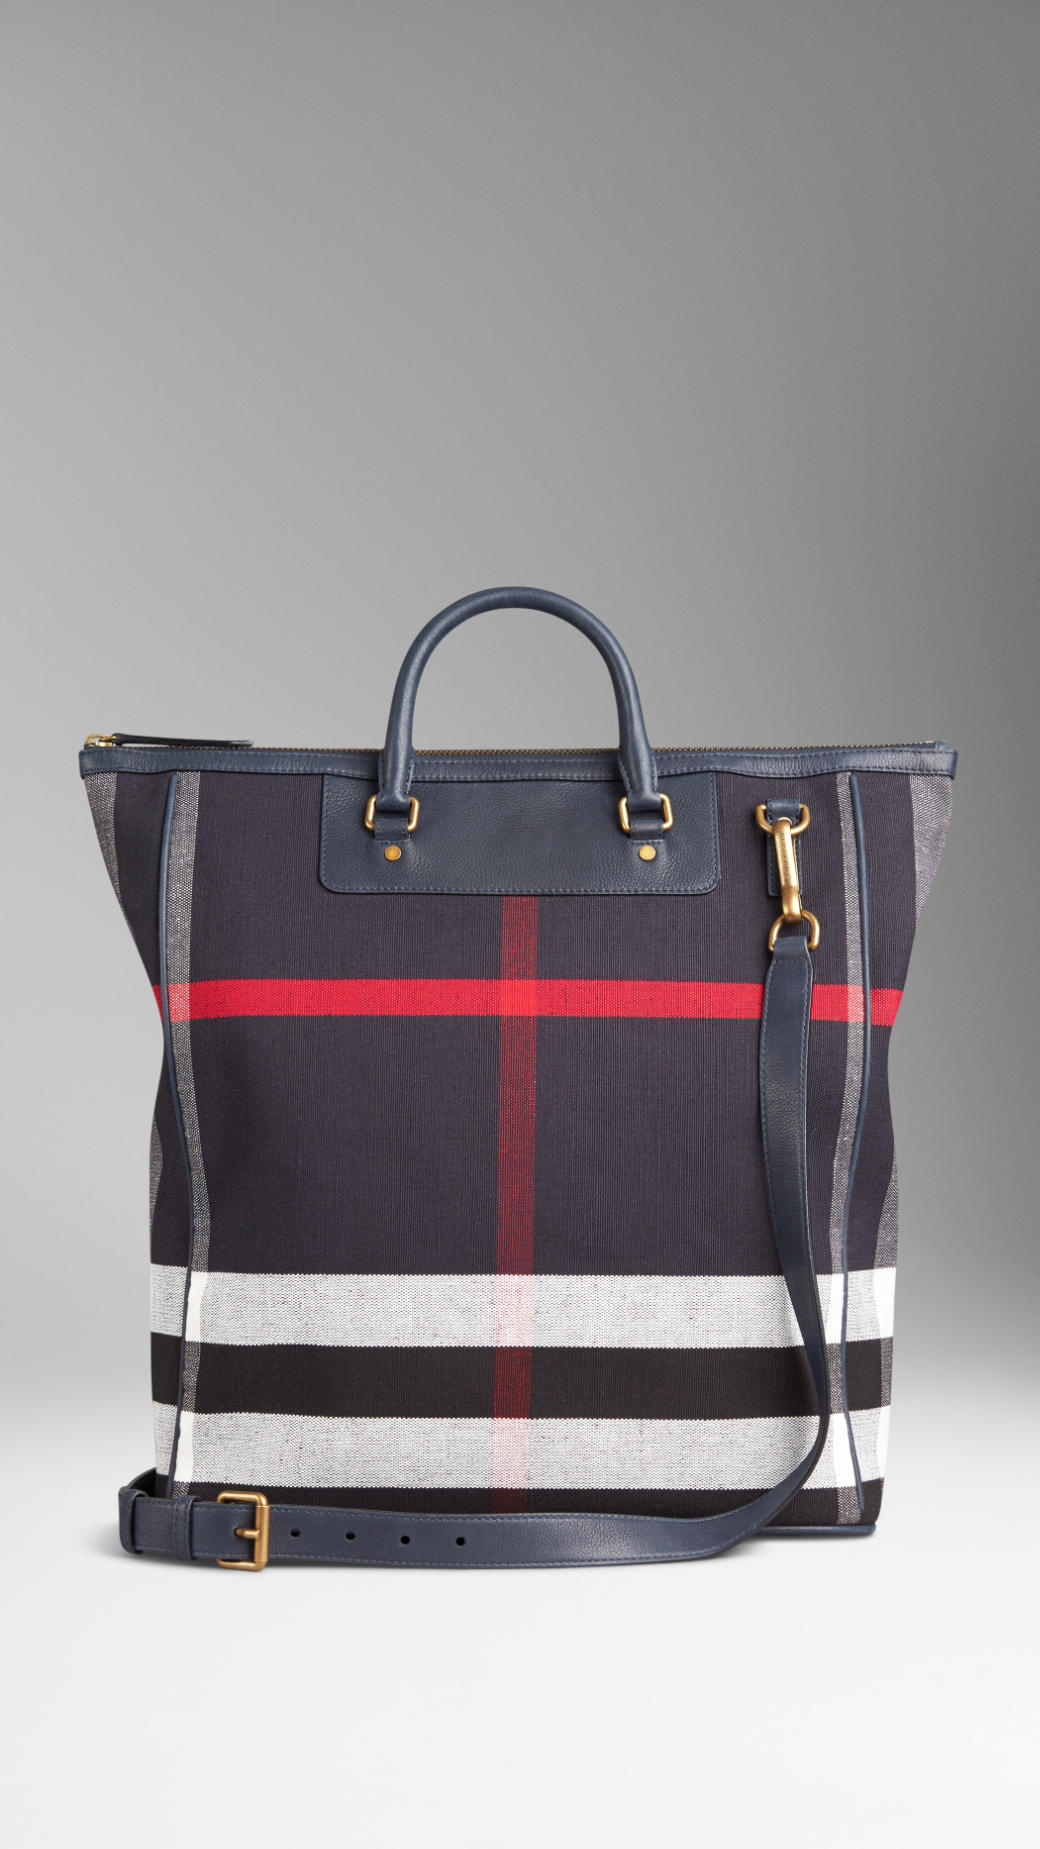 Burberry Large Canvas Check And Leather Tote Bag in Navy (Blue) for Men - Lyst